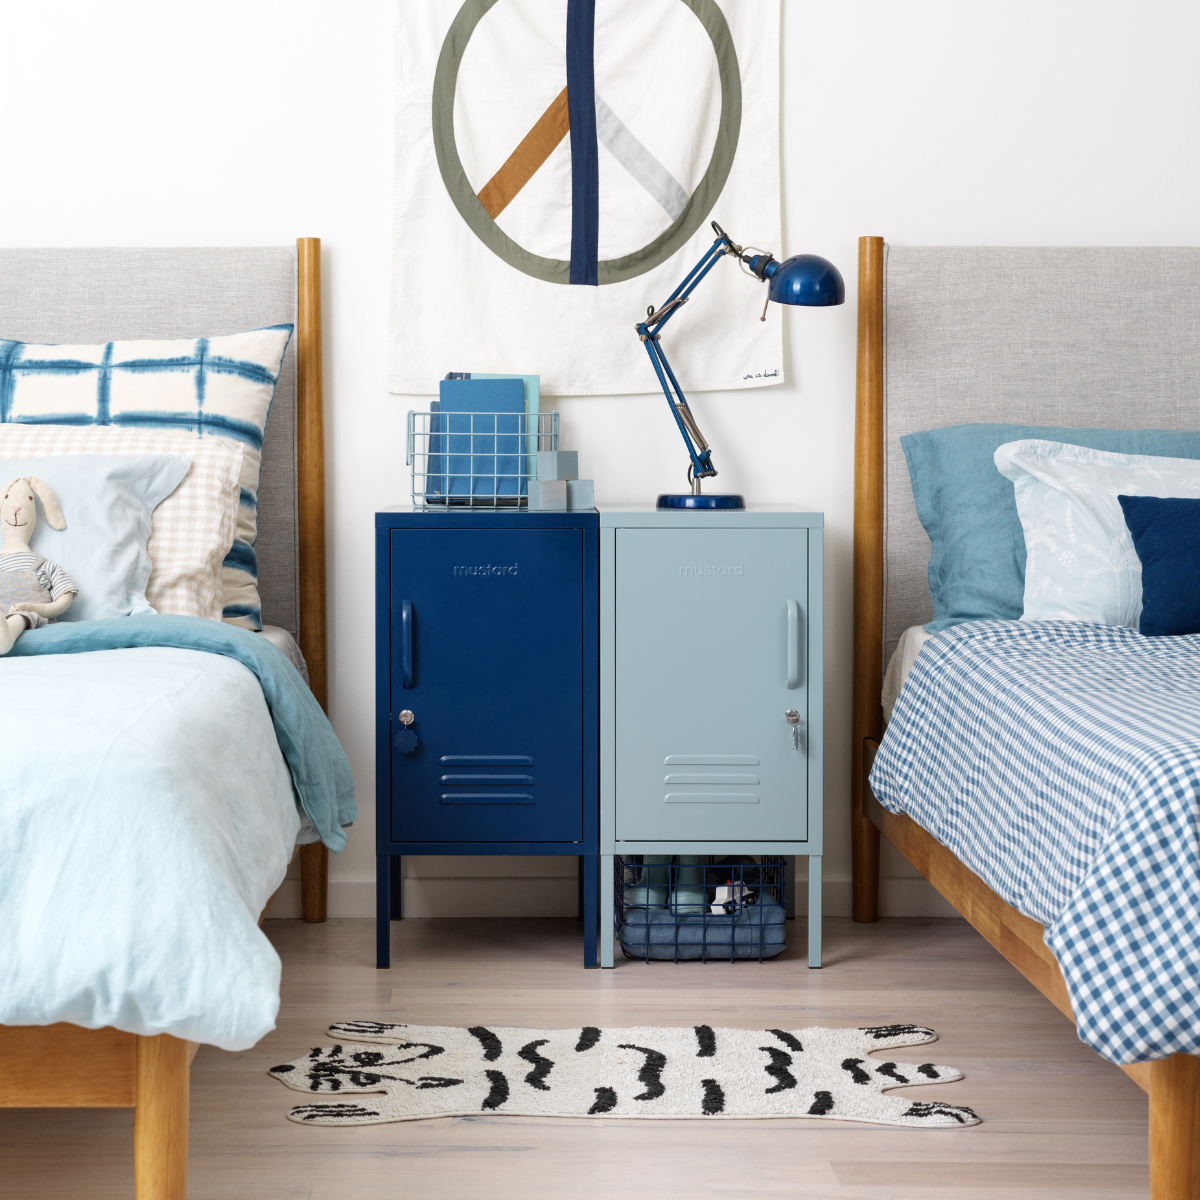 Two single beds sit either side of a pair of blue Shortys side by side. One locker is Ocean and one is Navy. The beds are styled with patterned fabrics in blues and whites and there is a small black and white rug on the floor.